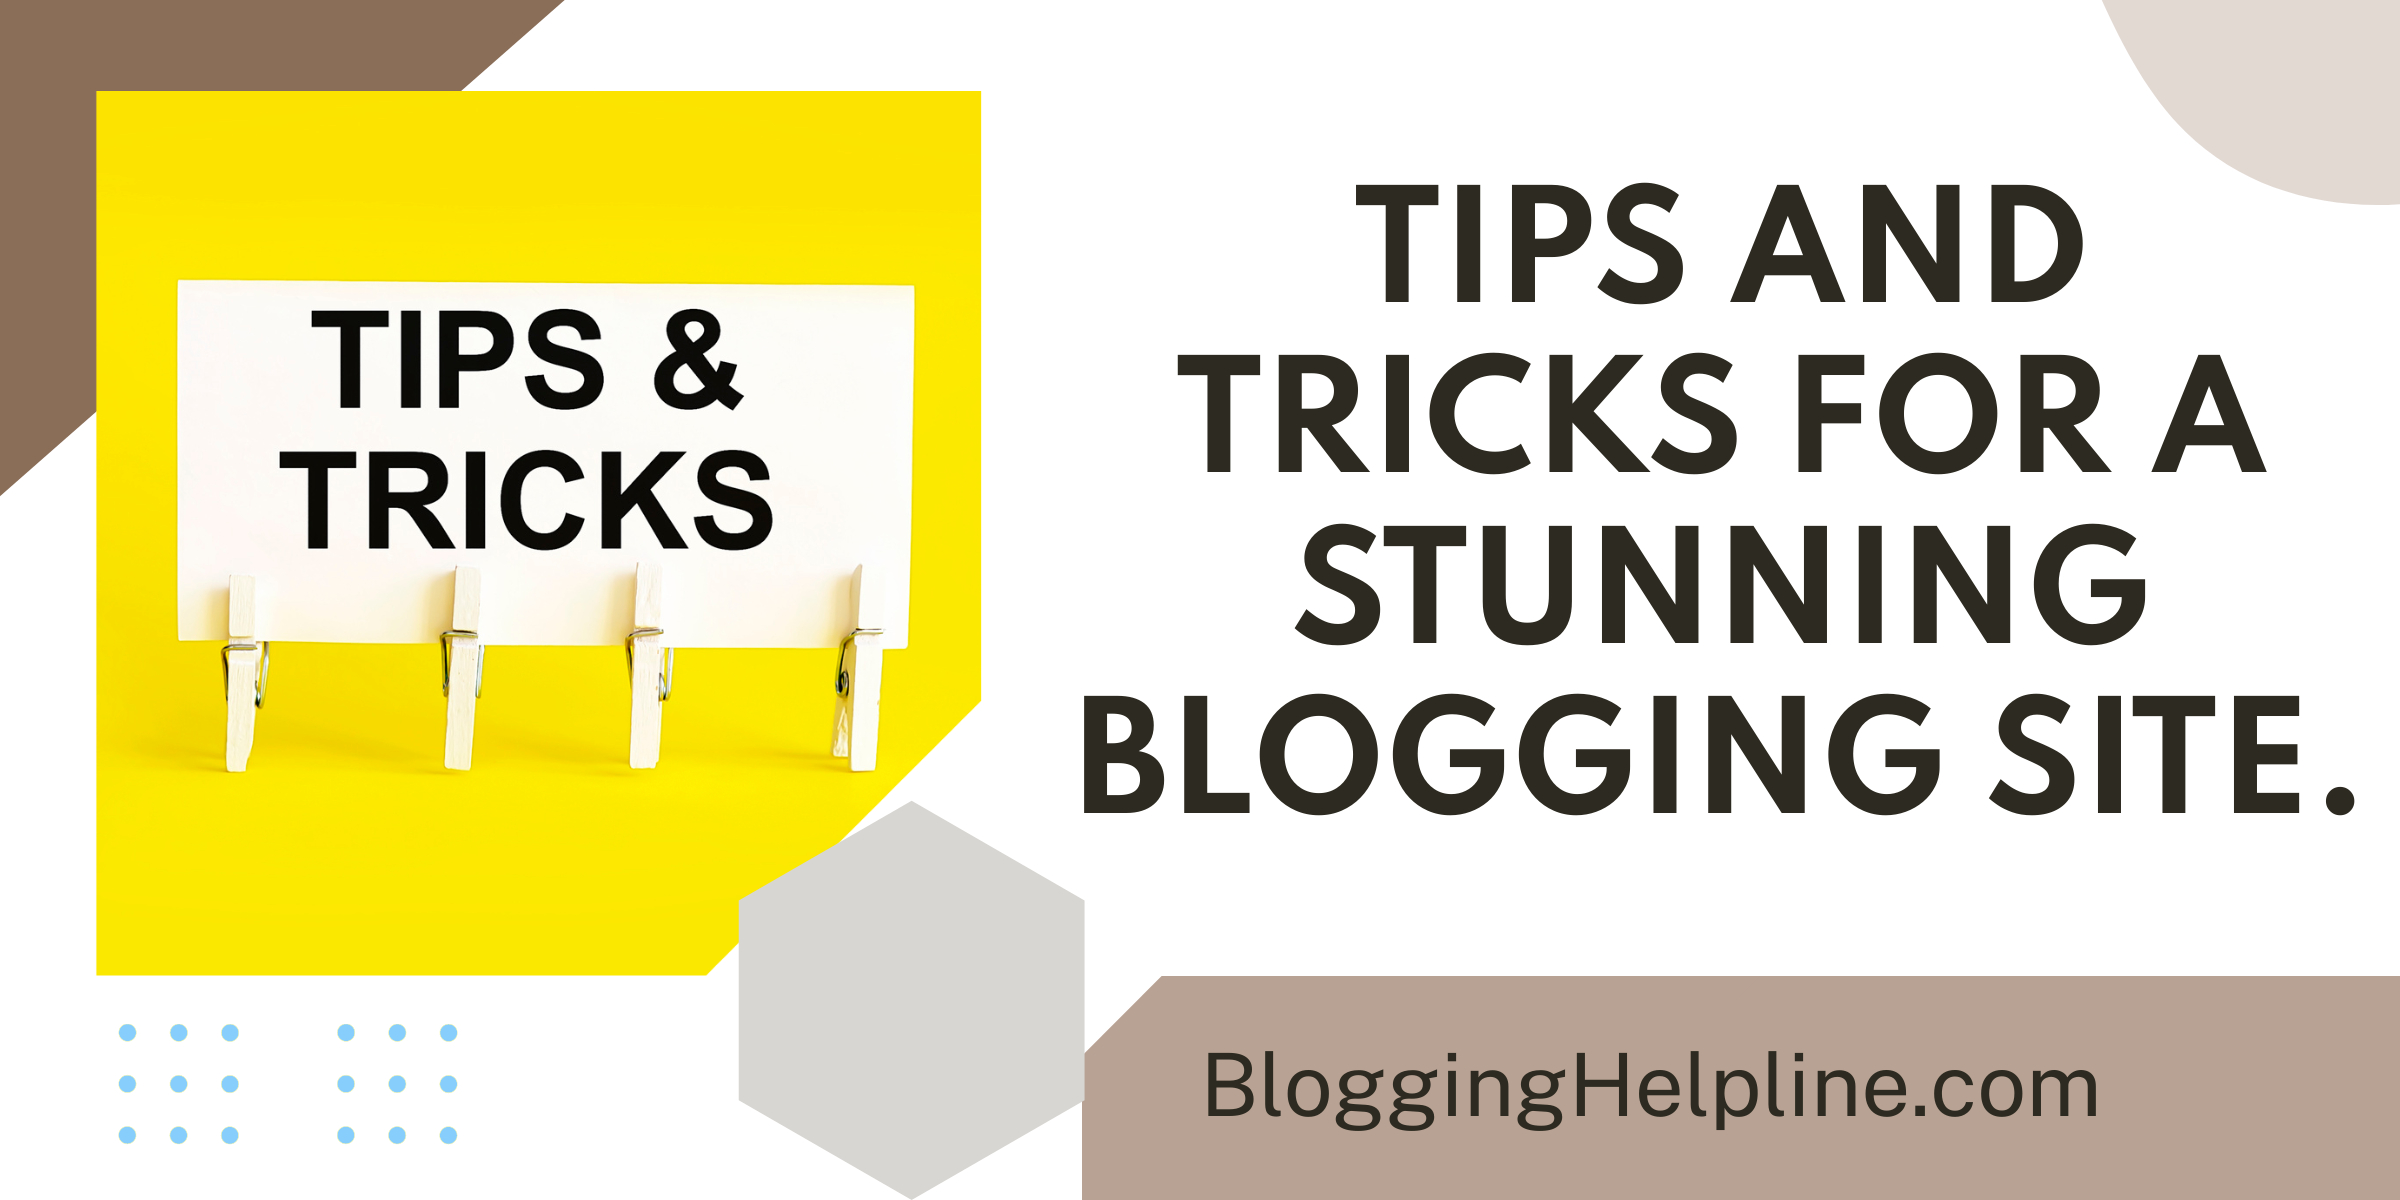 Tips and Tricks for a Stunning Blogging Site.